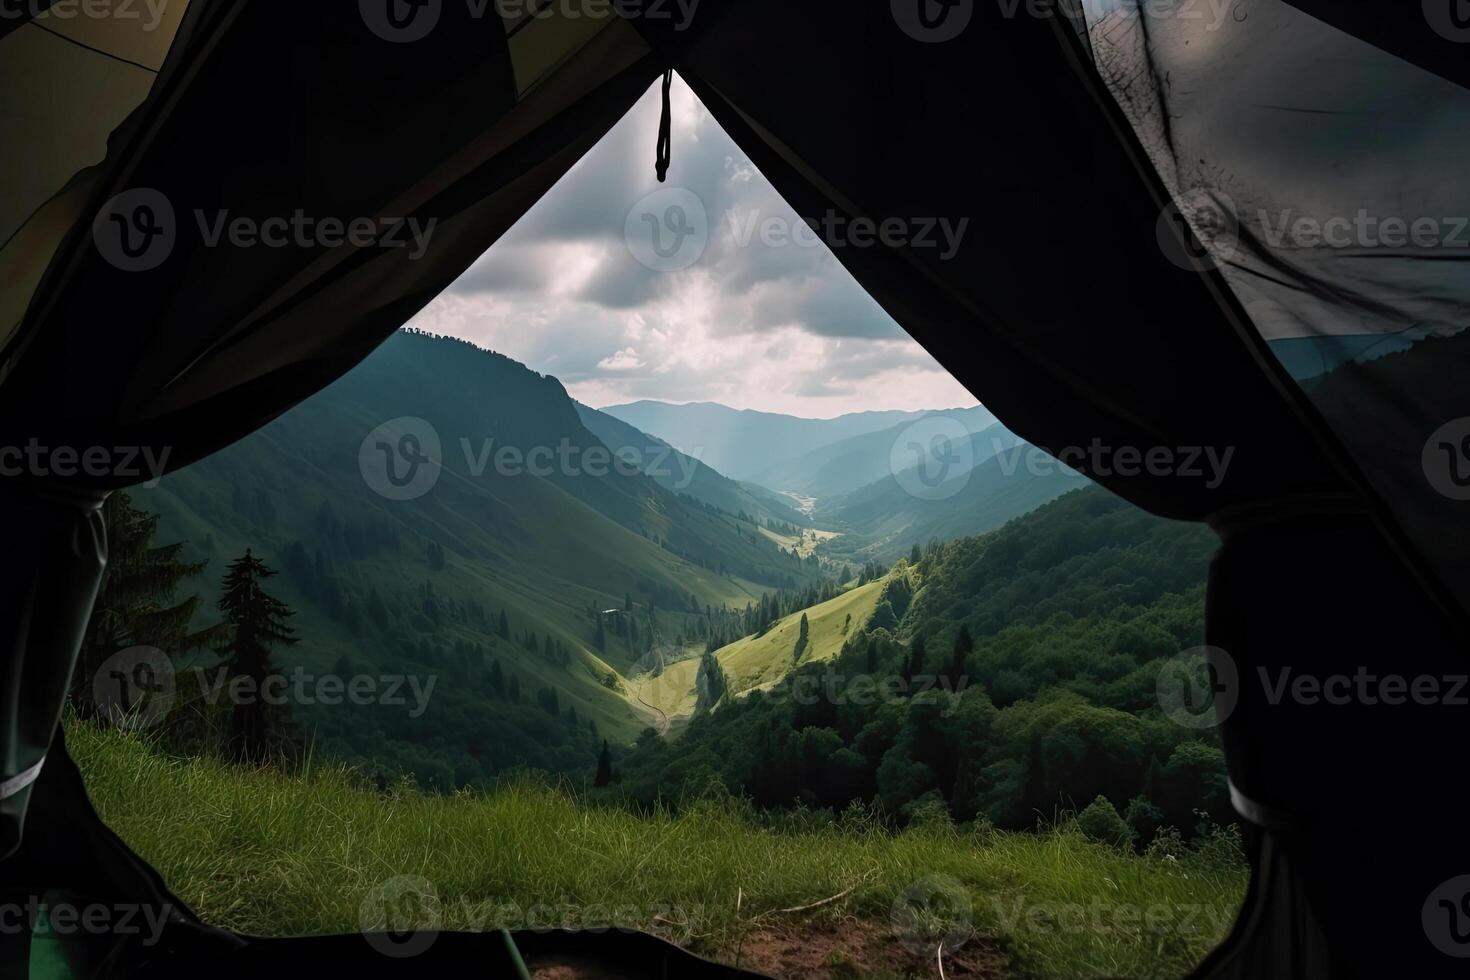 Amazing view from inside tent to mountain landscape. Camping during hike in mountains, outdoor activities. Created with photo